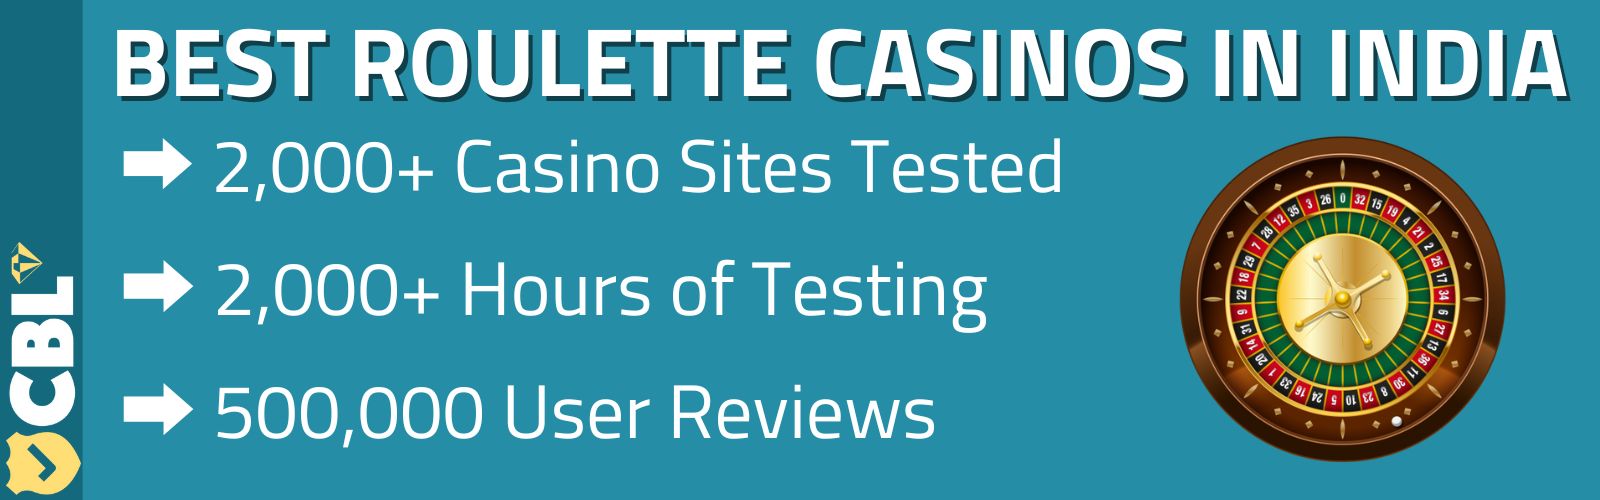 Discover The Best Casino Site In India For Exciting Gaming Action: Bet365